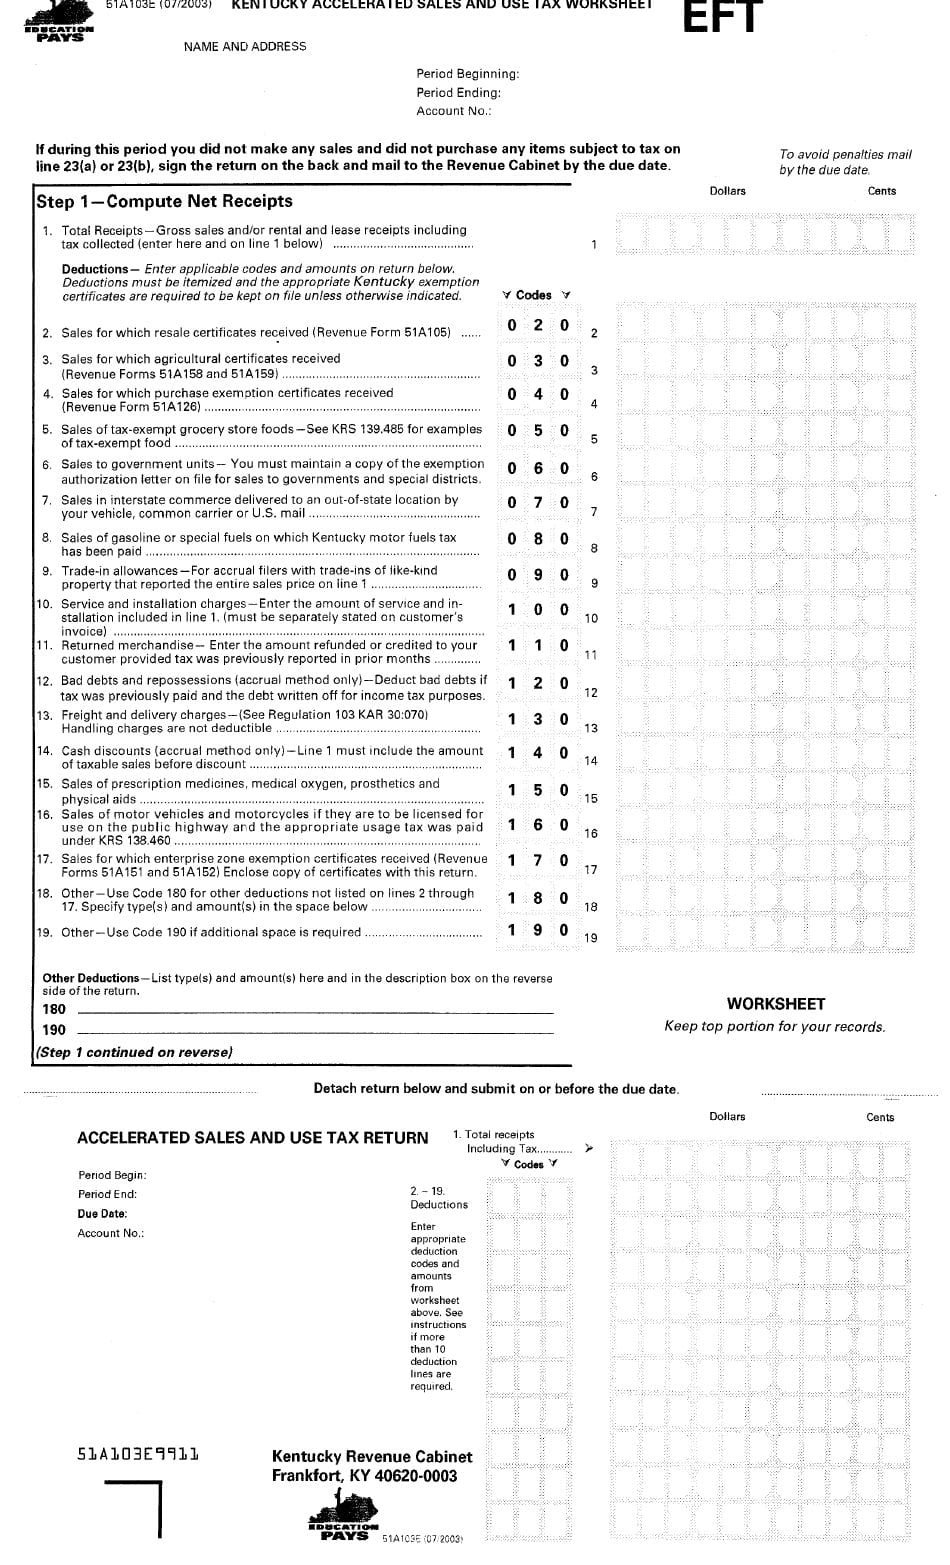 Kentucky Accelerated Sales  Use Tax Worksheet Printable Pdf